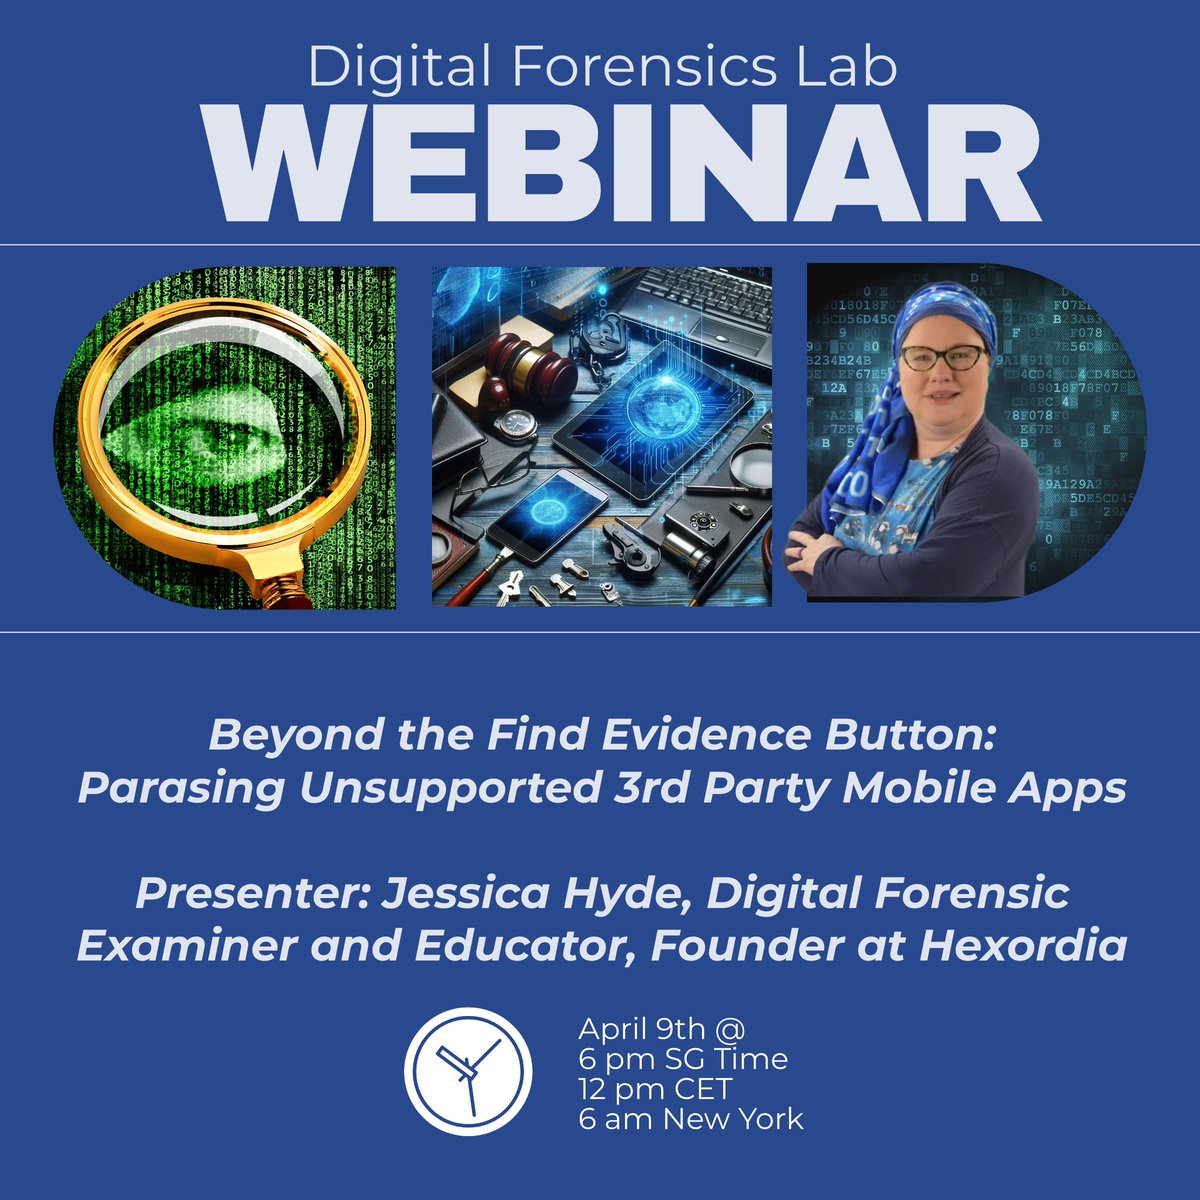 Honored to be sharing at the first Digital Forensics Lab Webinar! Join me to learn how to go Beyond the Find Evidence Button to parse unsupported 3rd party apps on April 9, 6PM SG/ 12PM CET/ 6AM New York. #DFIR #Infosec interpol.webex.com/webappng/sites…